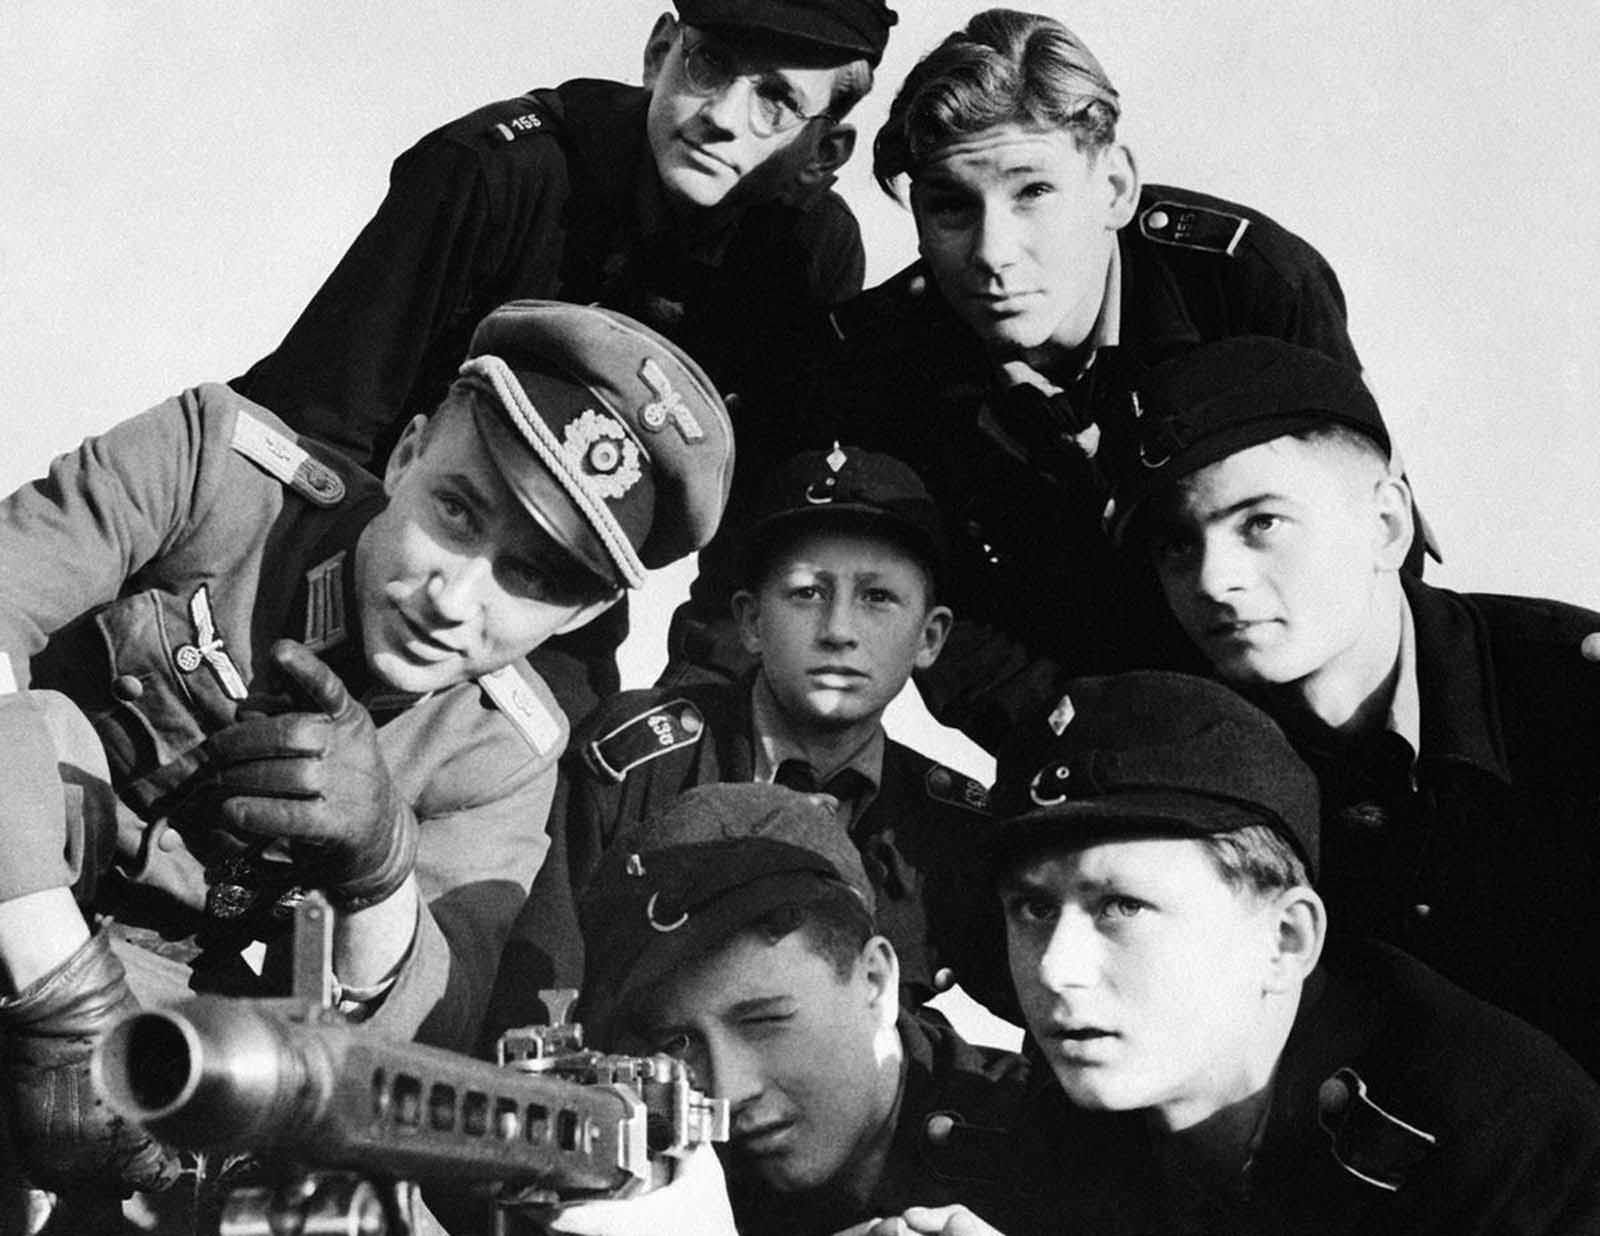 A group of Hitler youth receive instruction in the use of a machine-gun, somewhere in Germany, on December 27, 1944. Look at how young those kids are!